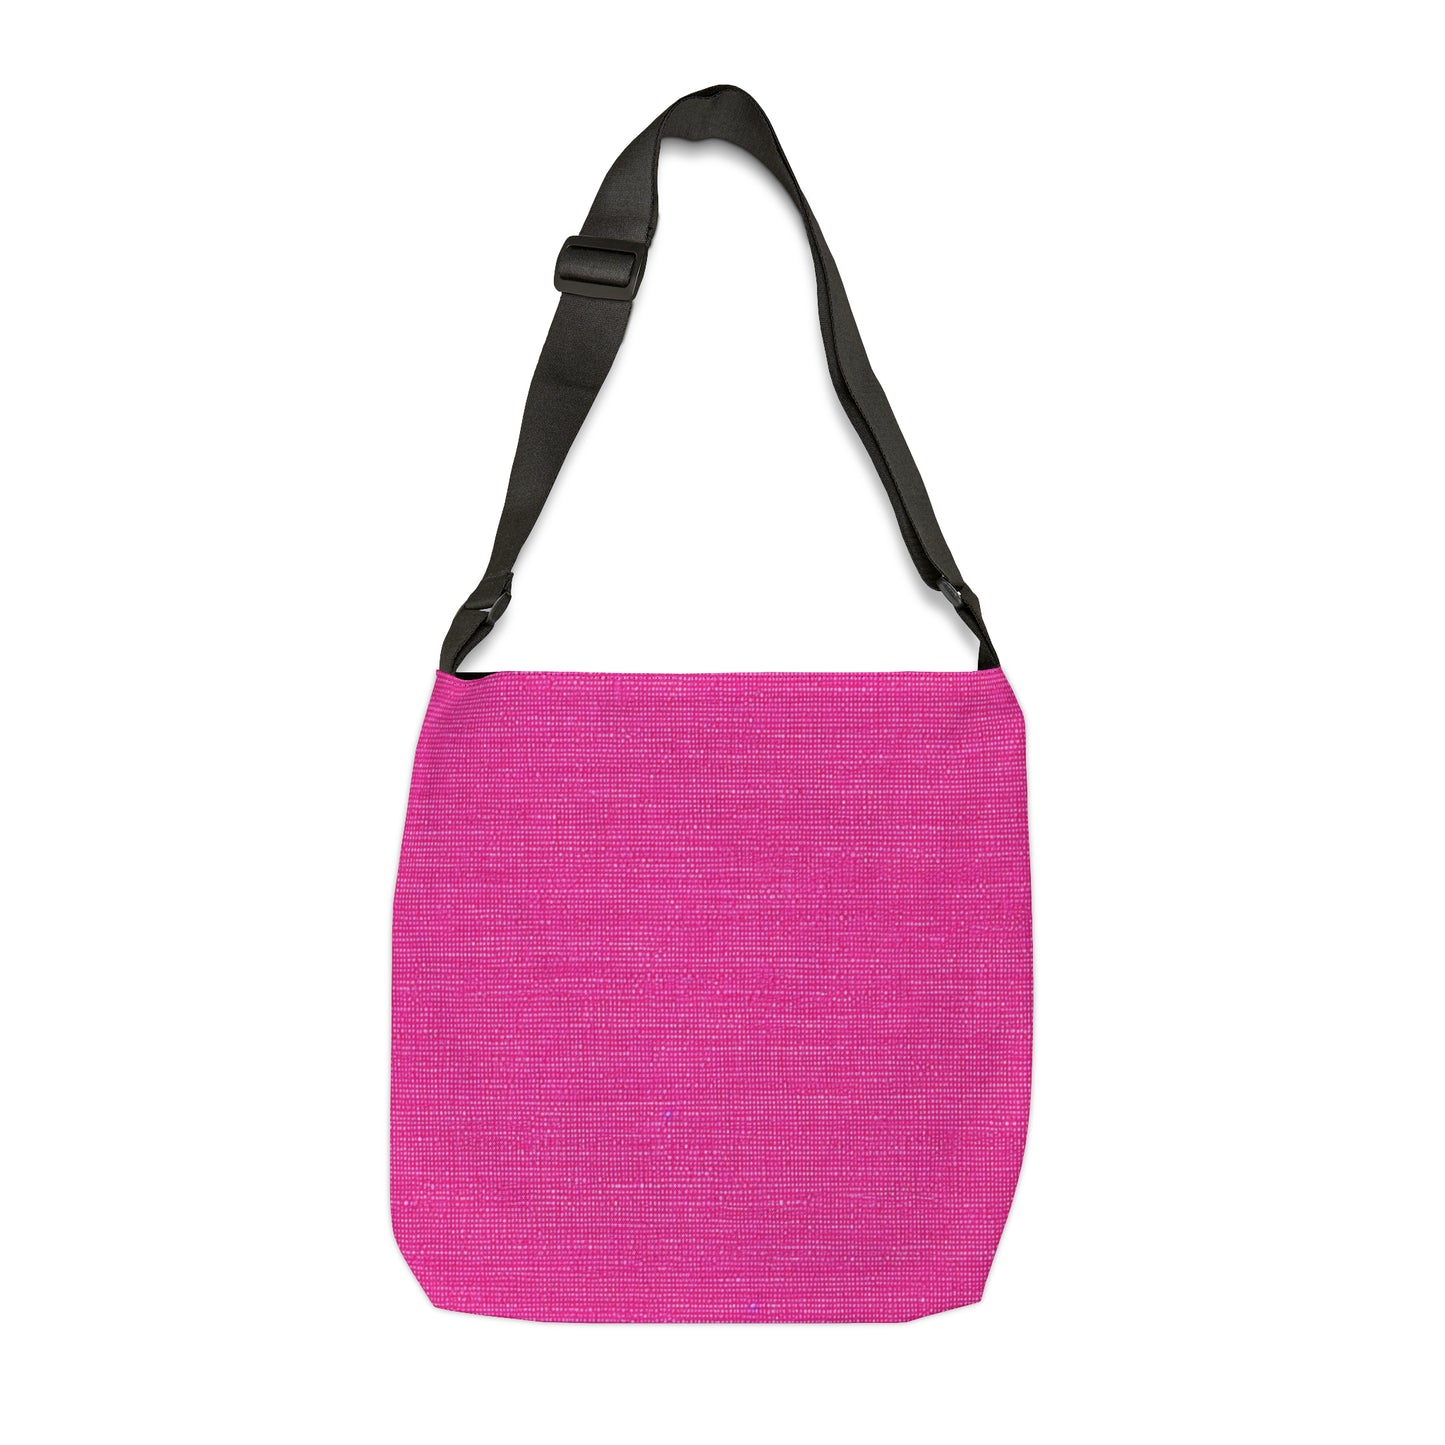 Hot Neon Pink Doll Like: Denim-Inspired, Bold & Bright Fabric - Adjustable Tote Bag (AOP)